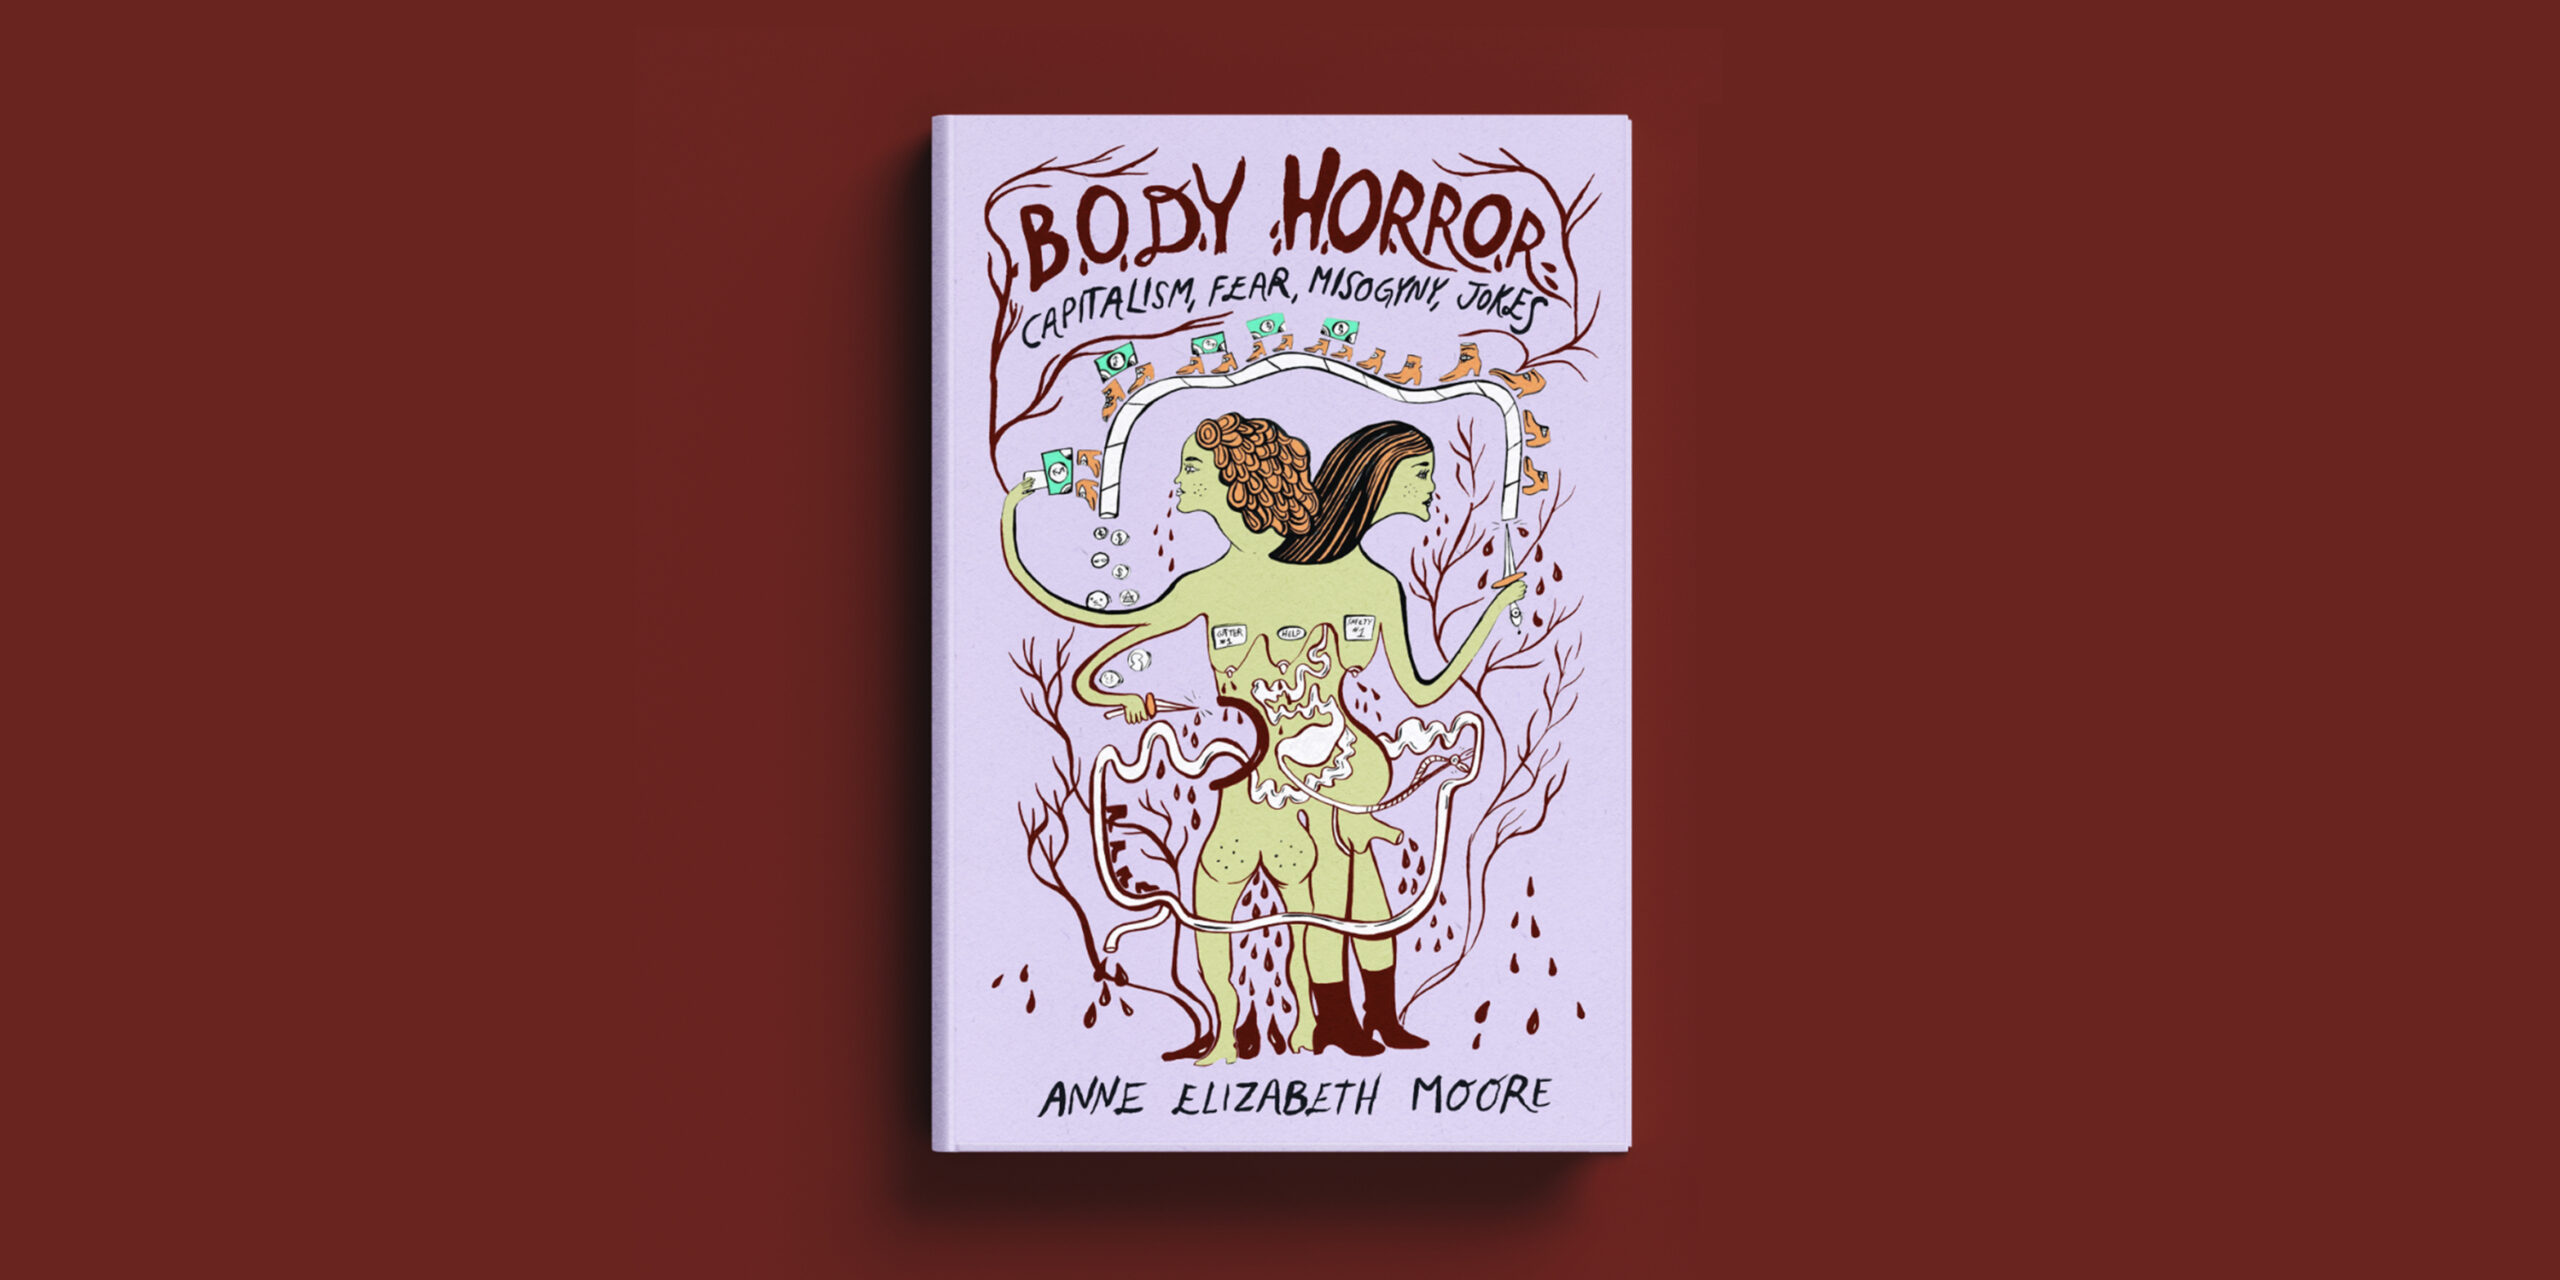 The book cover for Anne Elizabeth Moore's "Body Horror: Capitalism, Fear, Misogyny, Jokes," on a dark red background.